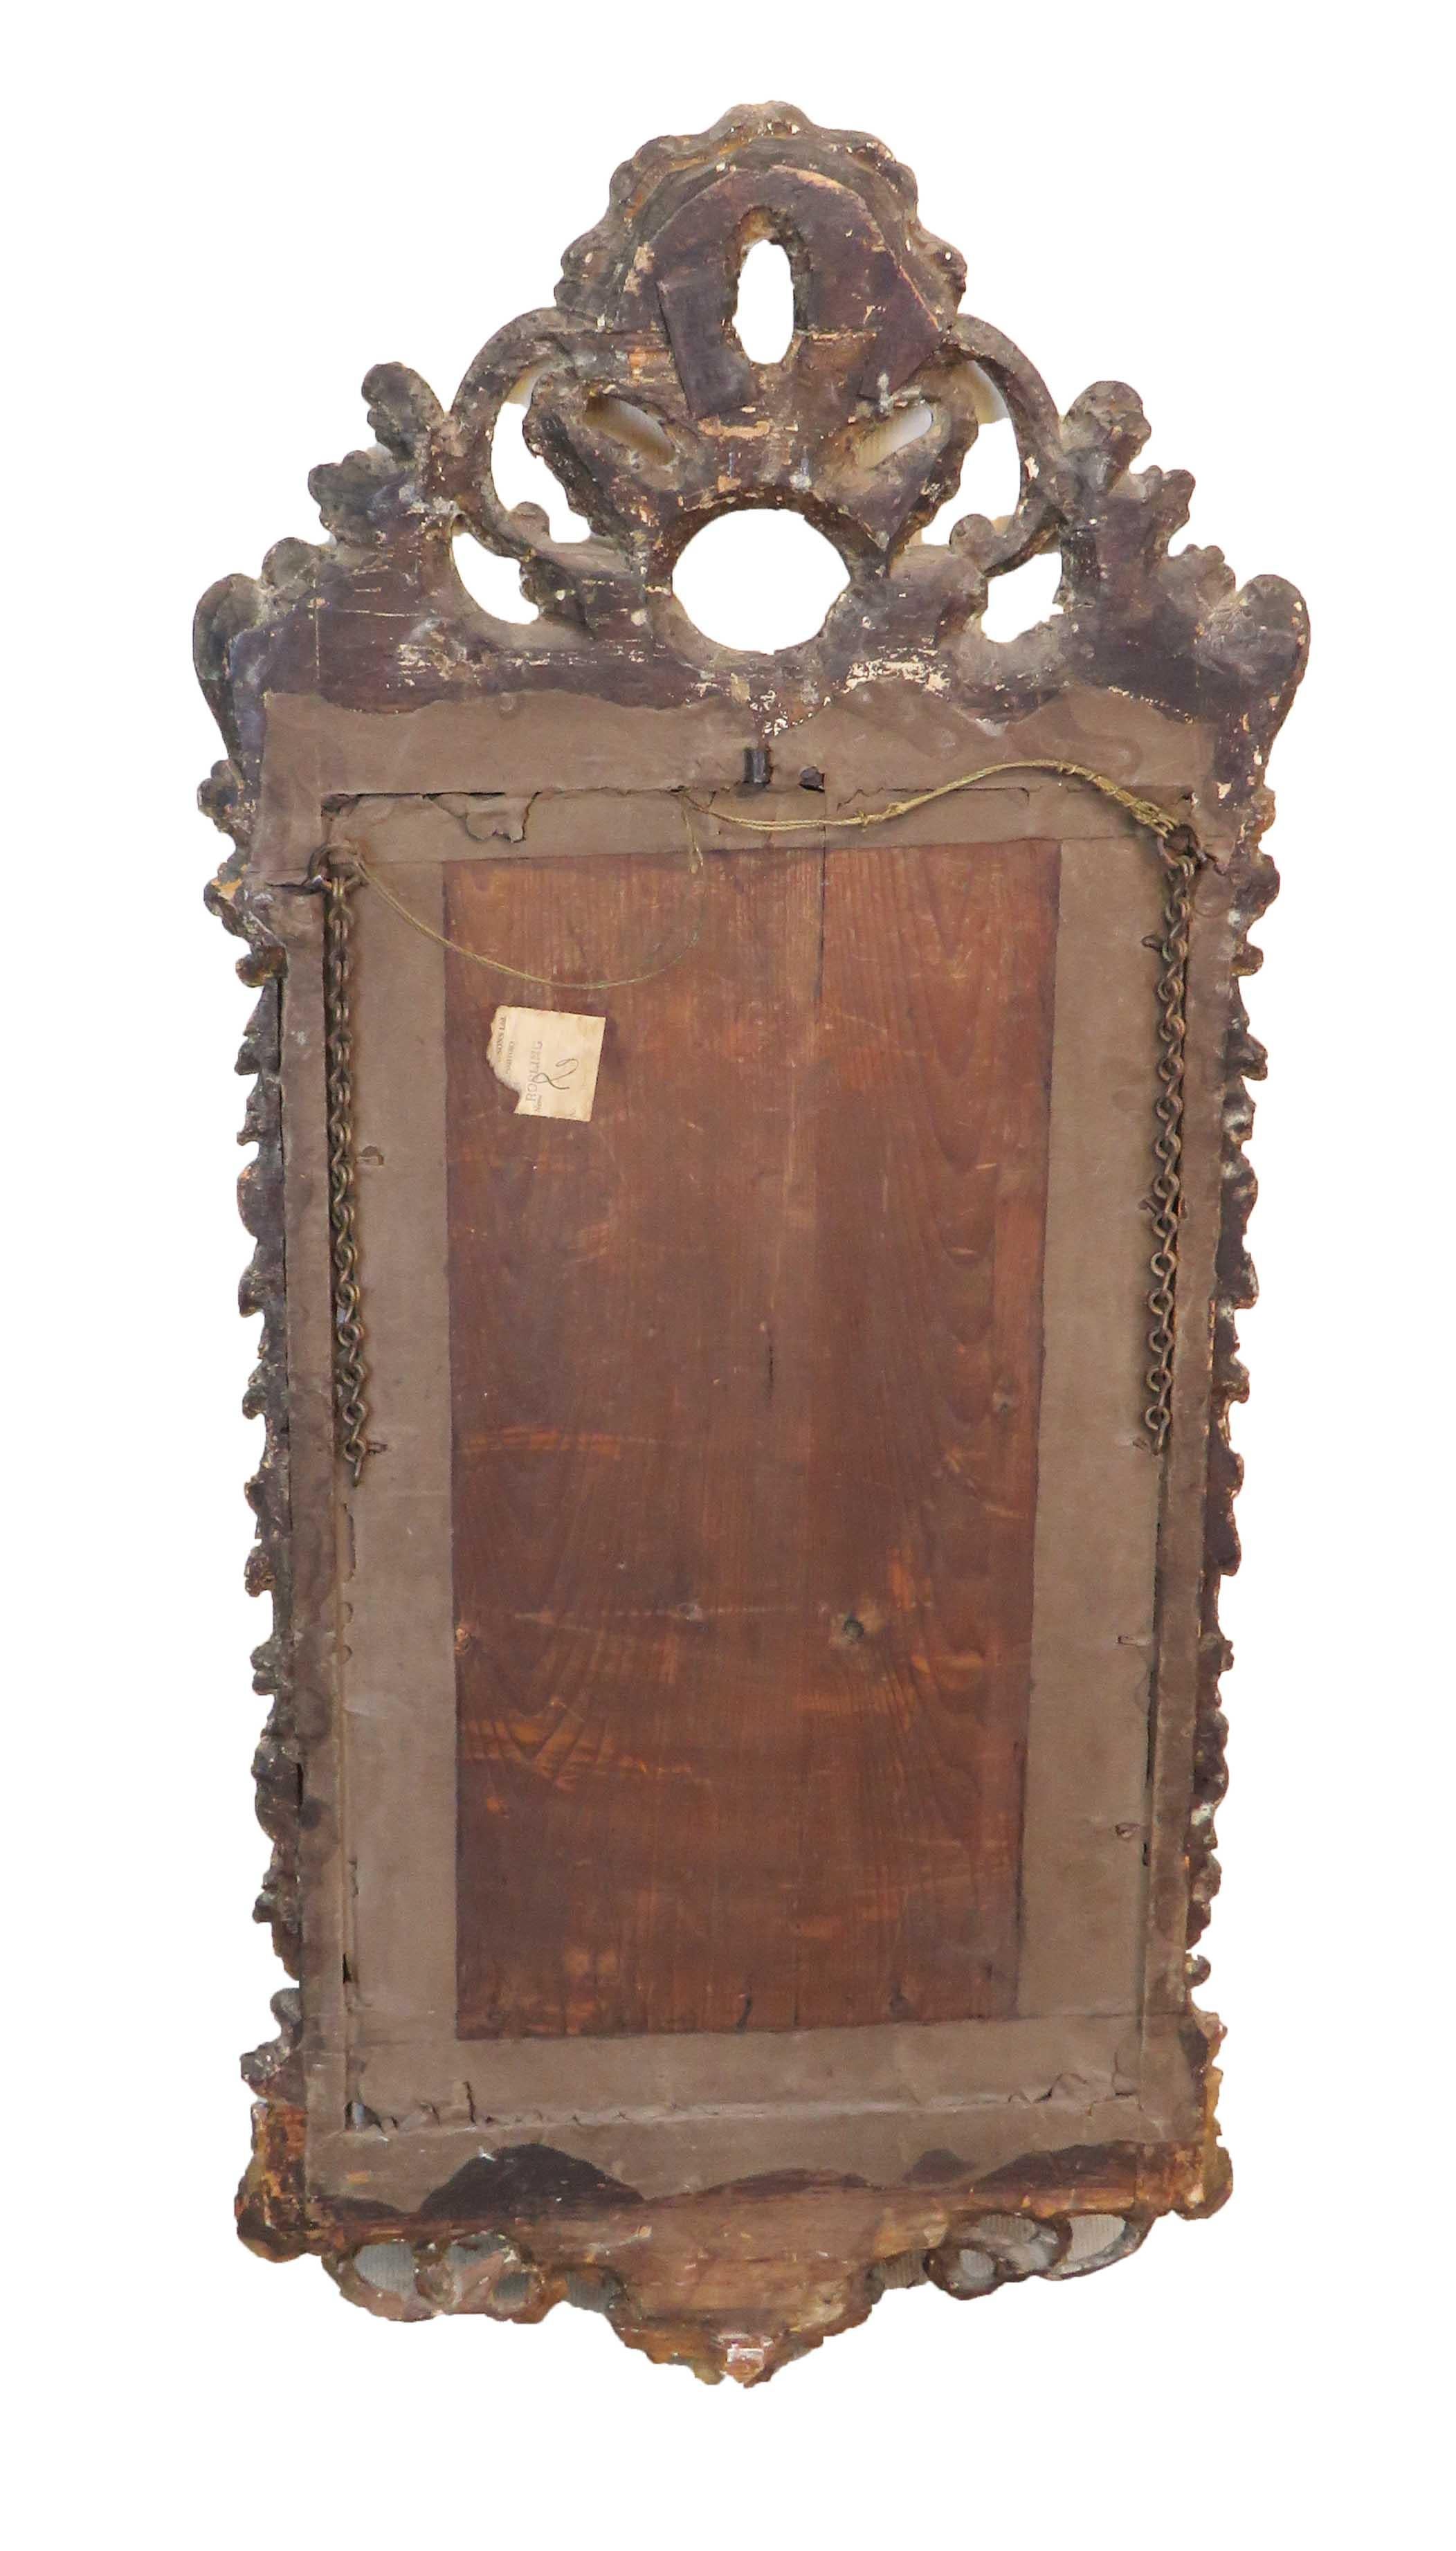 George II Giltwood and Gesso 18th Century Antique Wall Mirror (18. Jahrhundert)